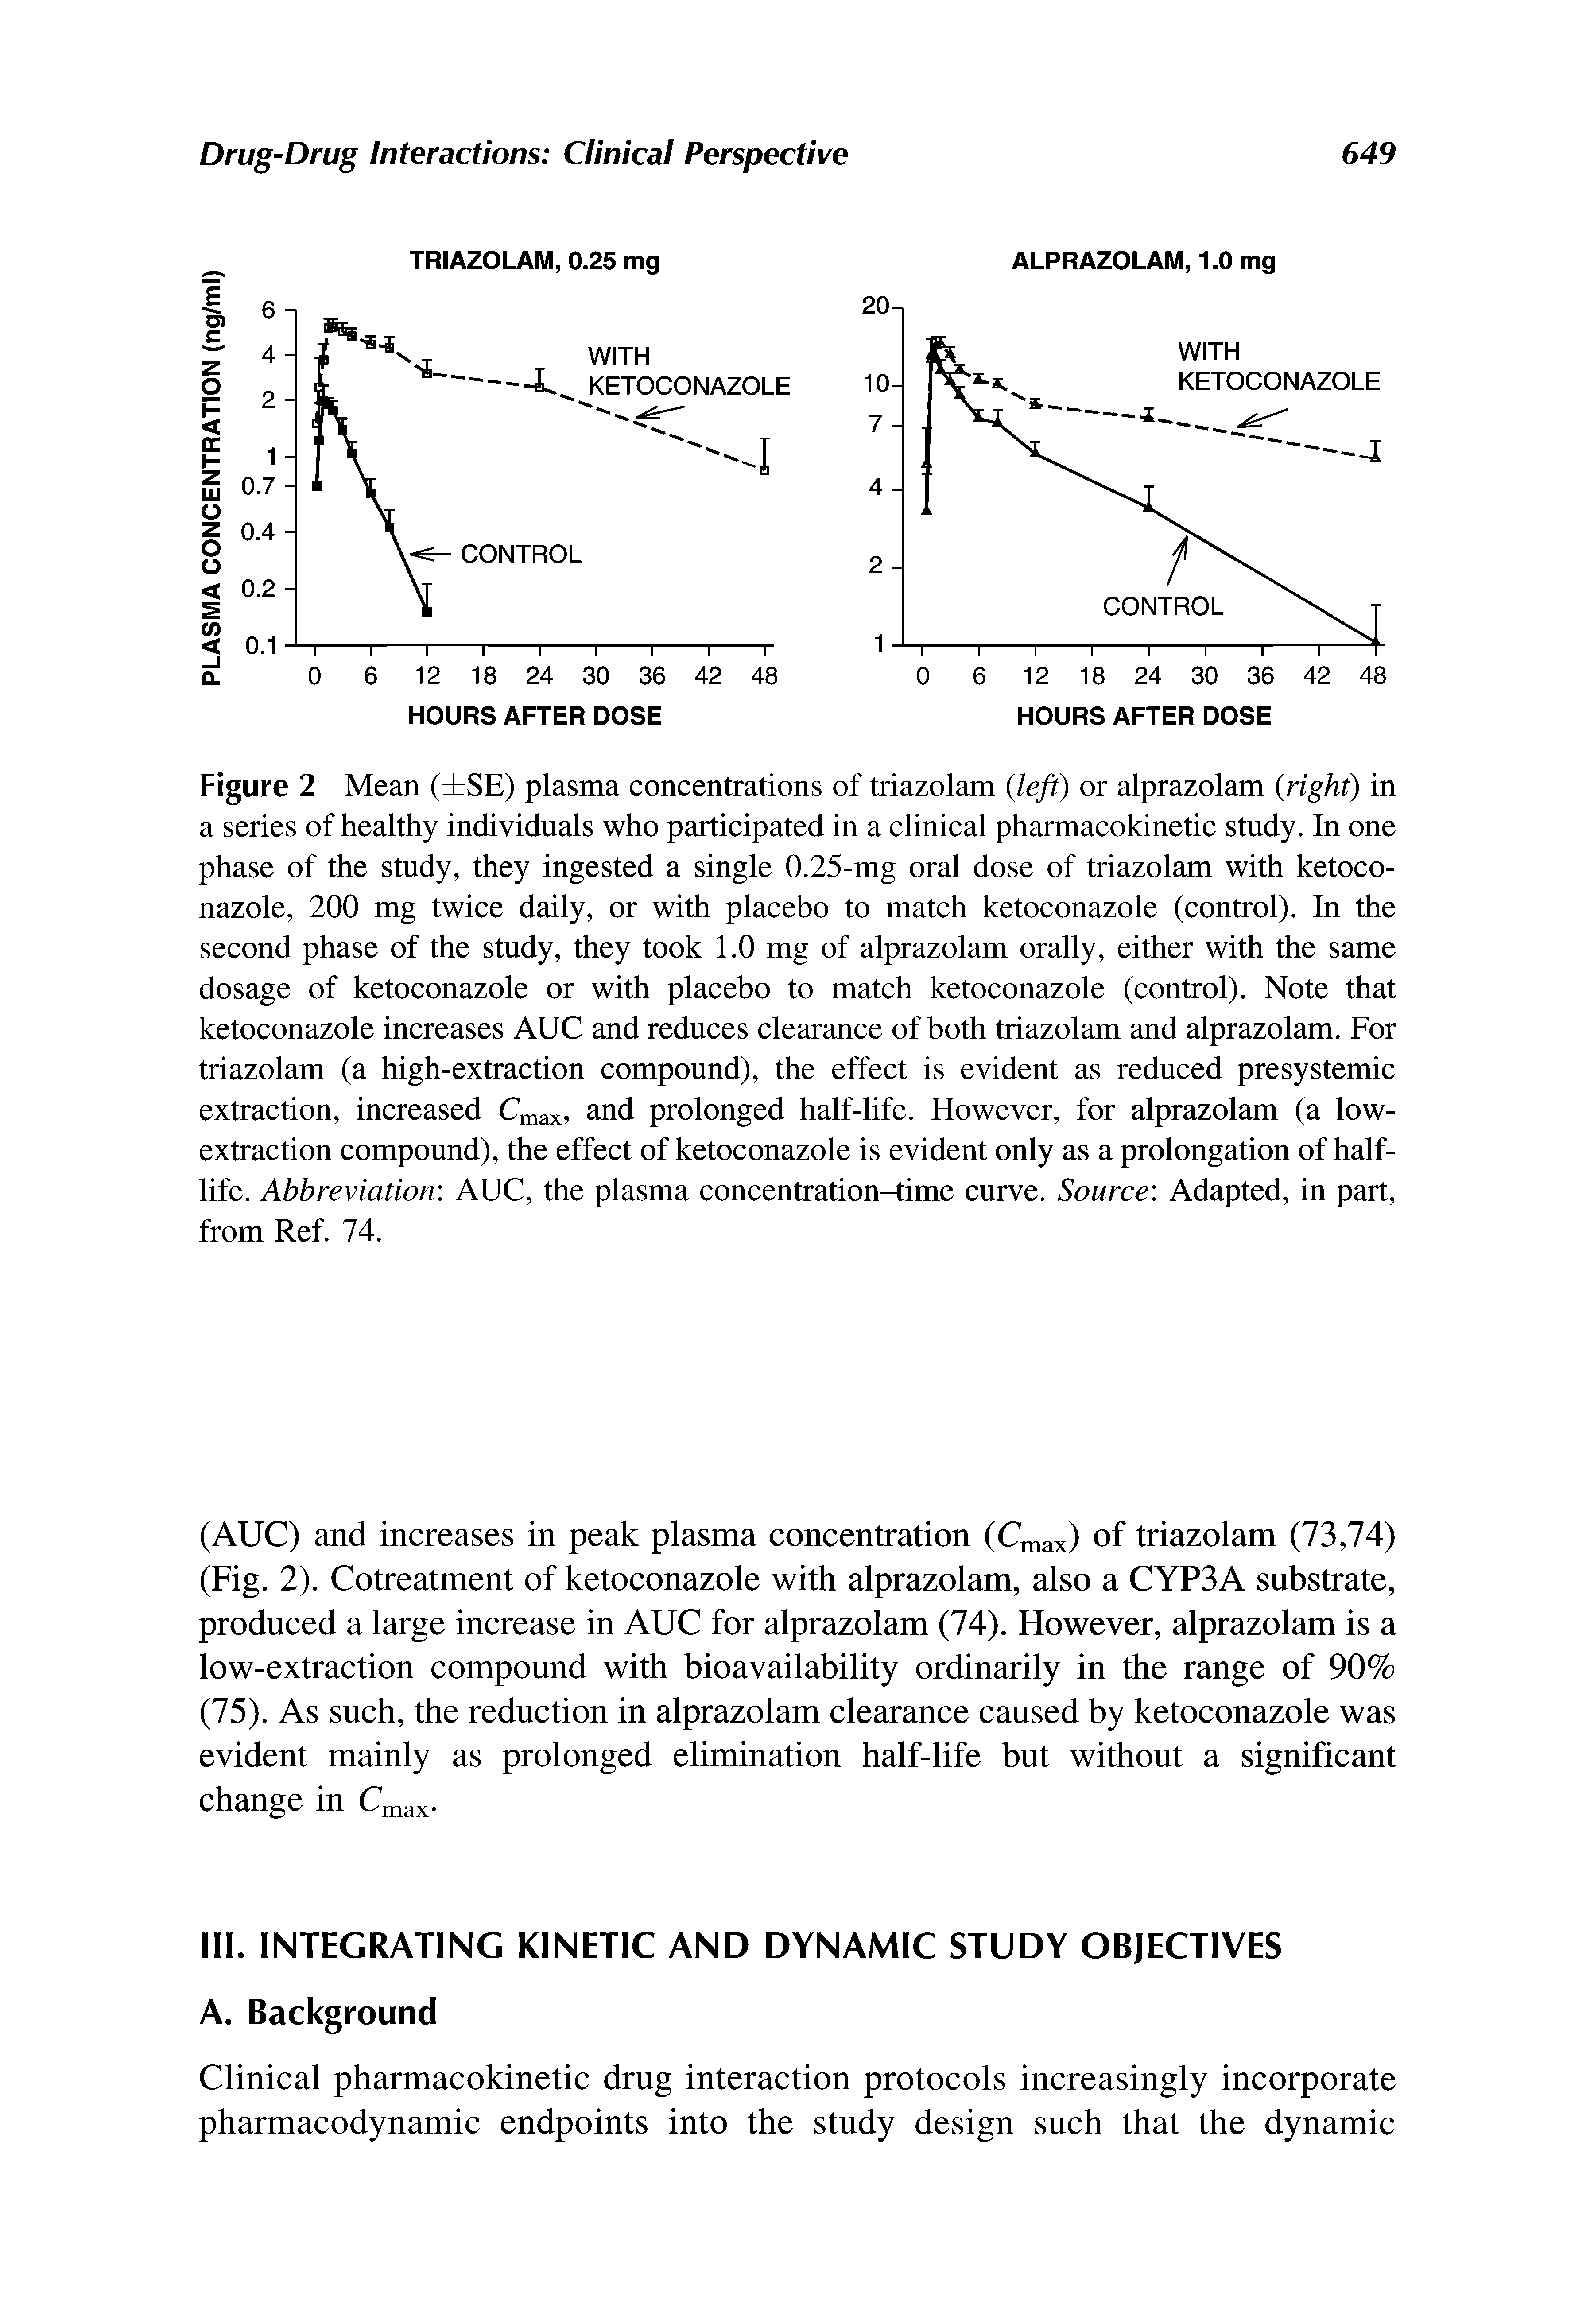 Figure 2 Mean ( SE) plasma concentrations of triazolam (left) or alprazolam (right) in a series of healthy individuals who participated in a clinical pharmacokinetic study. In one phase of the study, they ingested a single 0.25-mg oral dose of triazolam with ketoco-nazole, 200 mg twice daily, or with placebo to match ketoconazole (control). In the second phase of the study, they took 1.0 mg of alprazolam orally, either with the same dosage of ketoconazole or with placebo to match ketoconazole (control). Note that ketoconazole increases AUC and reduces clearance of both triazolam and alprazolam. For triazolam (a high-extraction compound), the effect is evident as reduced presystemic extraction, increased Cmax, and prolonged half-life. However, for alprazolam (a low-extraction compound), the effect of ketoconazole is evident only as a prolongation of half-life. Abbreviation AUC, the plasma concentration-time curve. Source Adapted, in part, from Ref. 74.